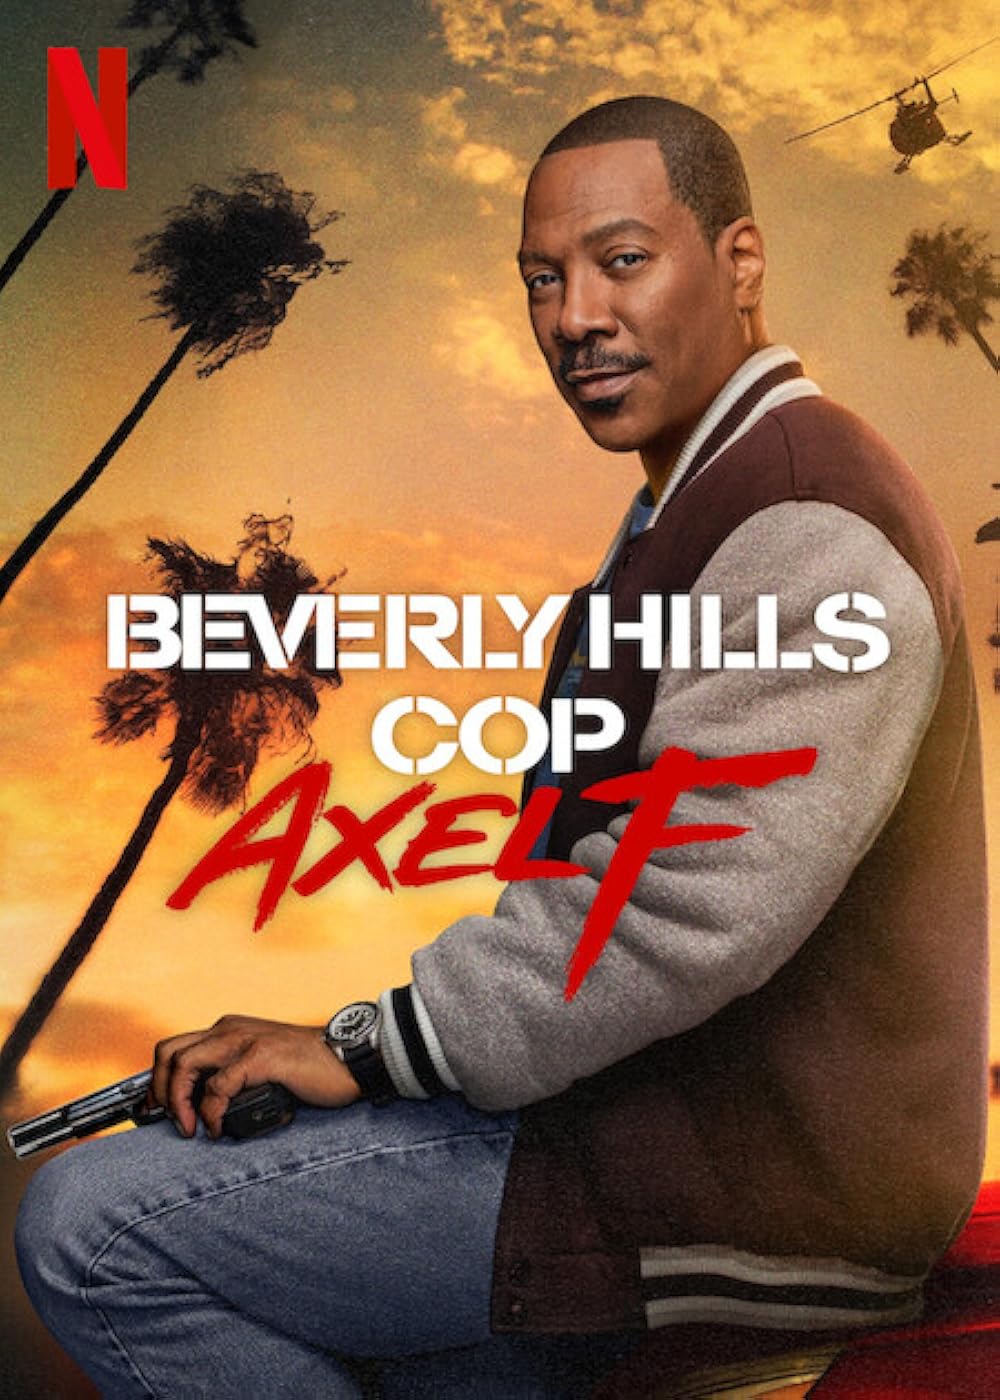 Beverly Hills Cop: Axel F (3 July 2024, Netflix)  As the fourth movie in the Beverly Hills Cop series and a follow-up to Beverly Hills Cop III (1994), this action-comedy brings Axel Foley back to Beverly Hills. The savvy police lieutenant from Detroit joins forces with his daughter Jane, her ex-boyfriend, and his old buddies John Taggart and Billy Rosewood to uncover who is threatening his daughter.